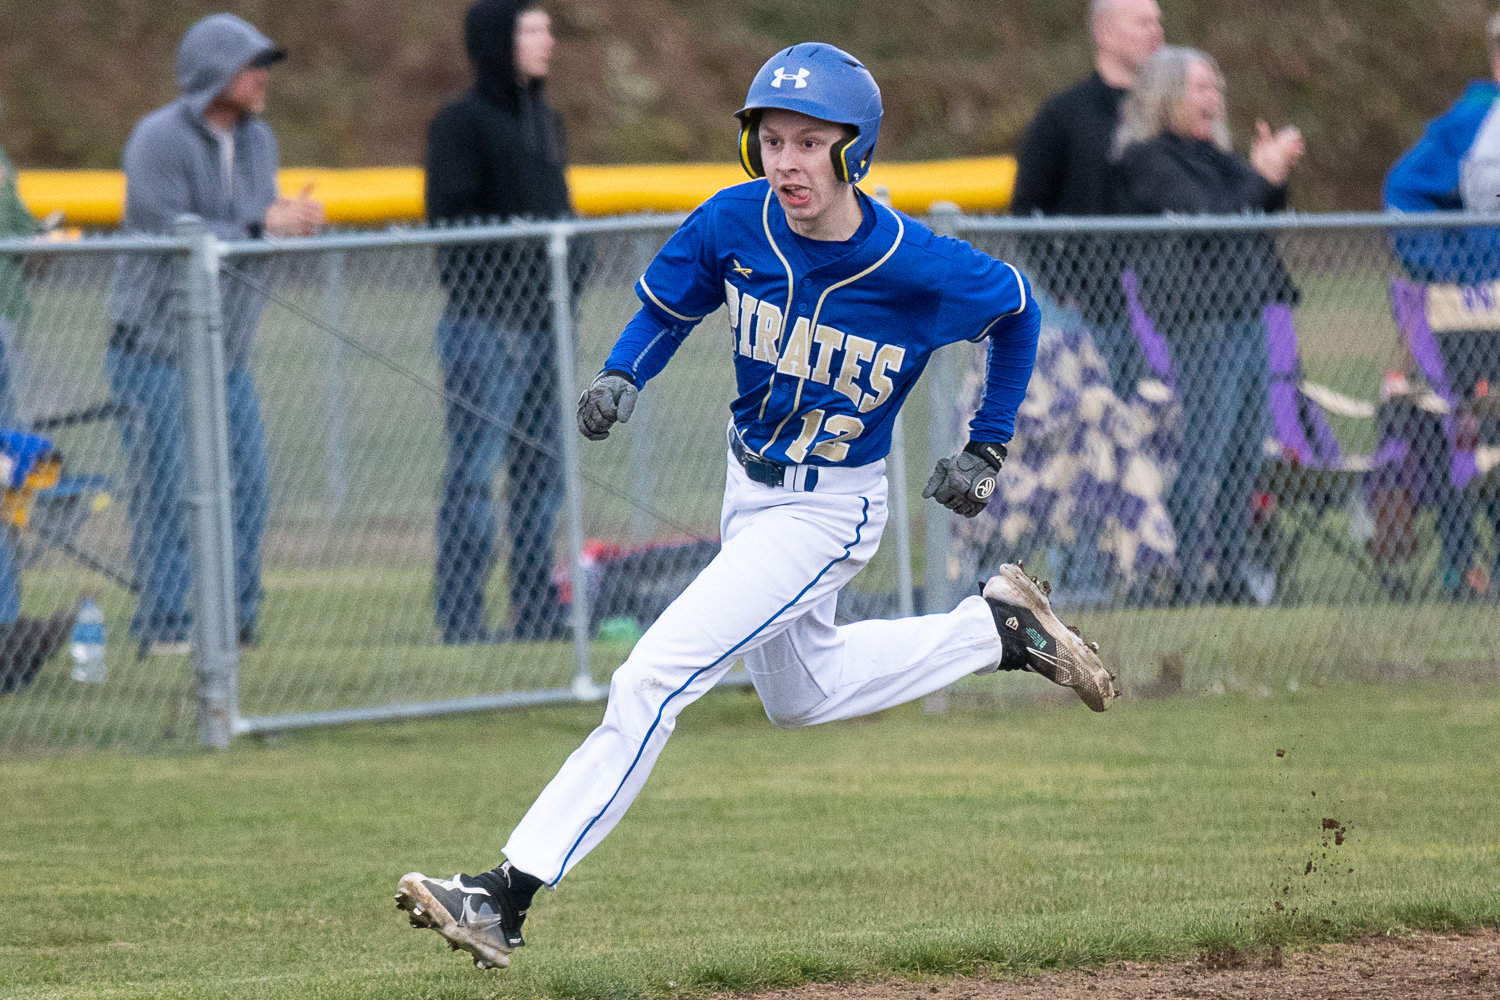 Nate Schueber heads for home to score during Adna's 10-4 win over Napavine on March 15.